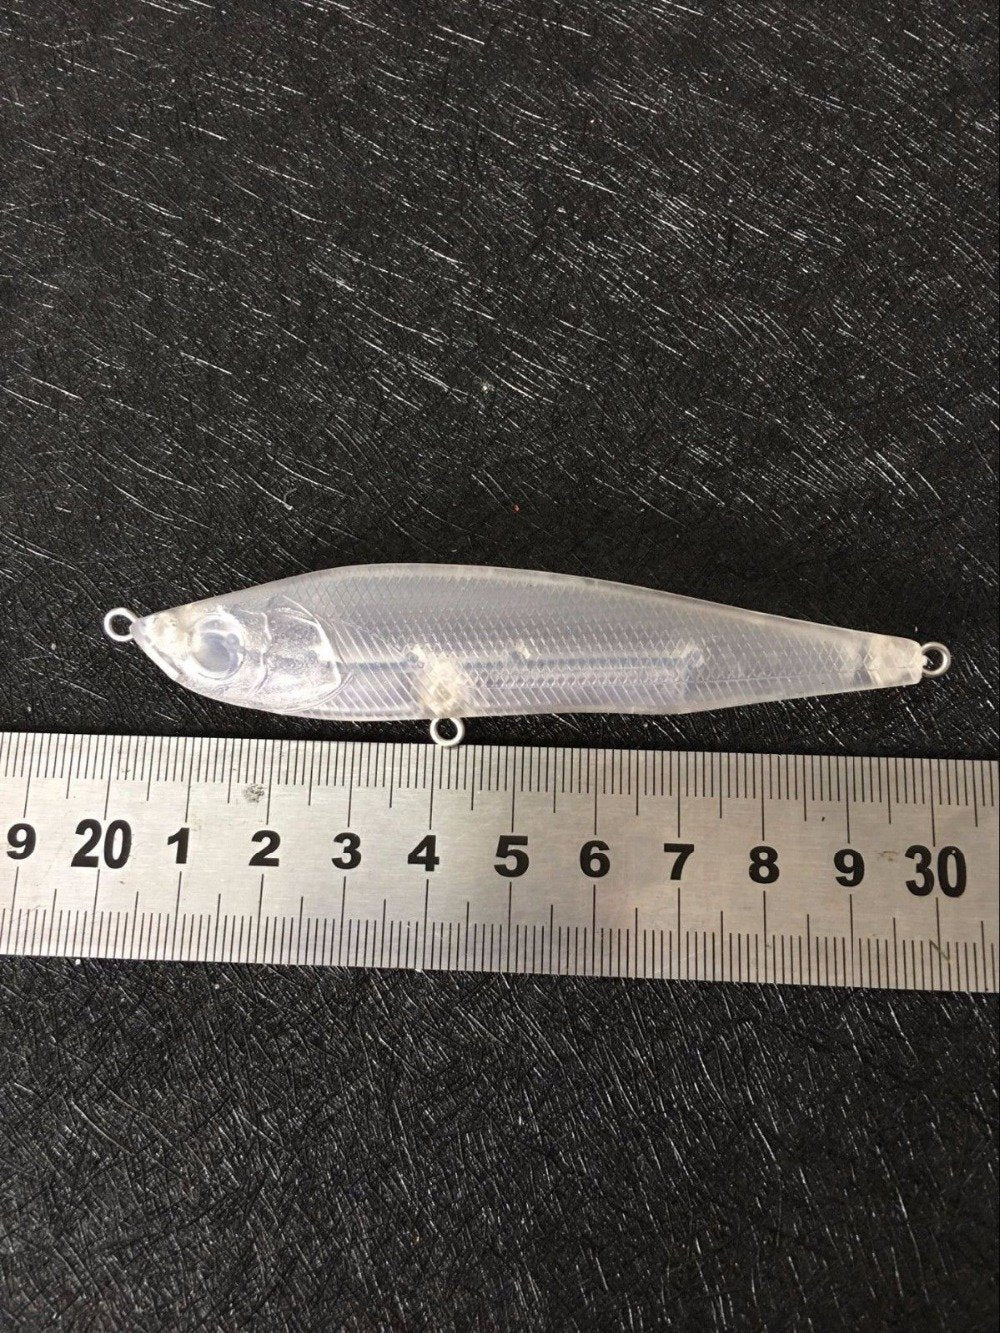 5Pcs Unpainted Fishing Lure Body 4 Inch 2/3 Oz Blank Lures Js